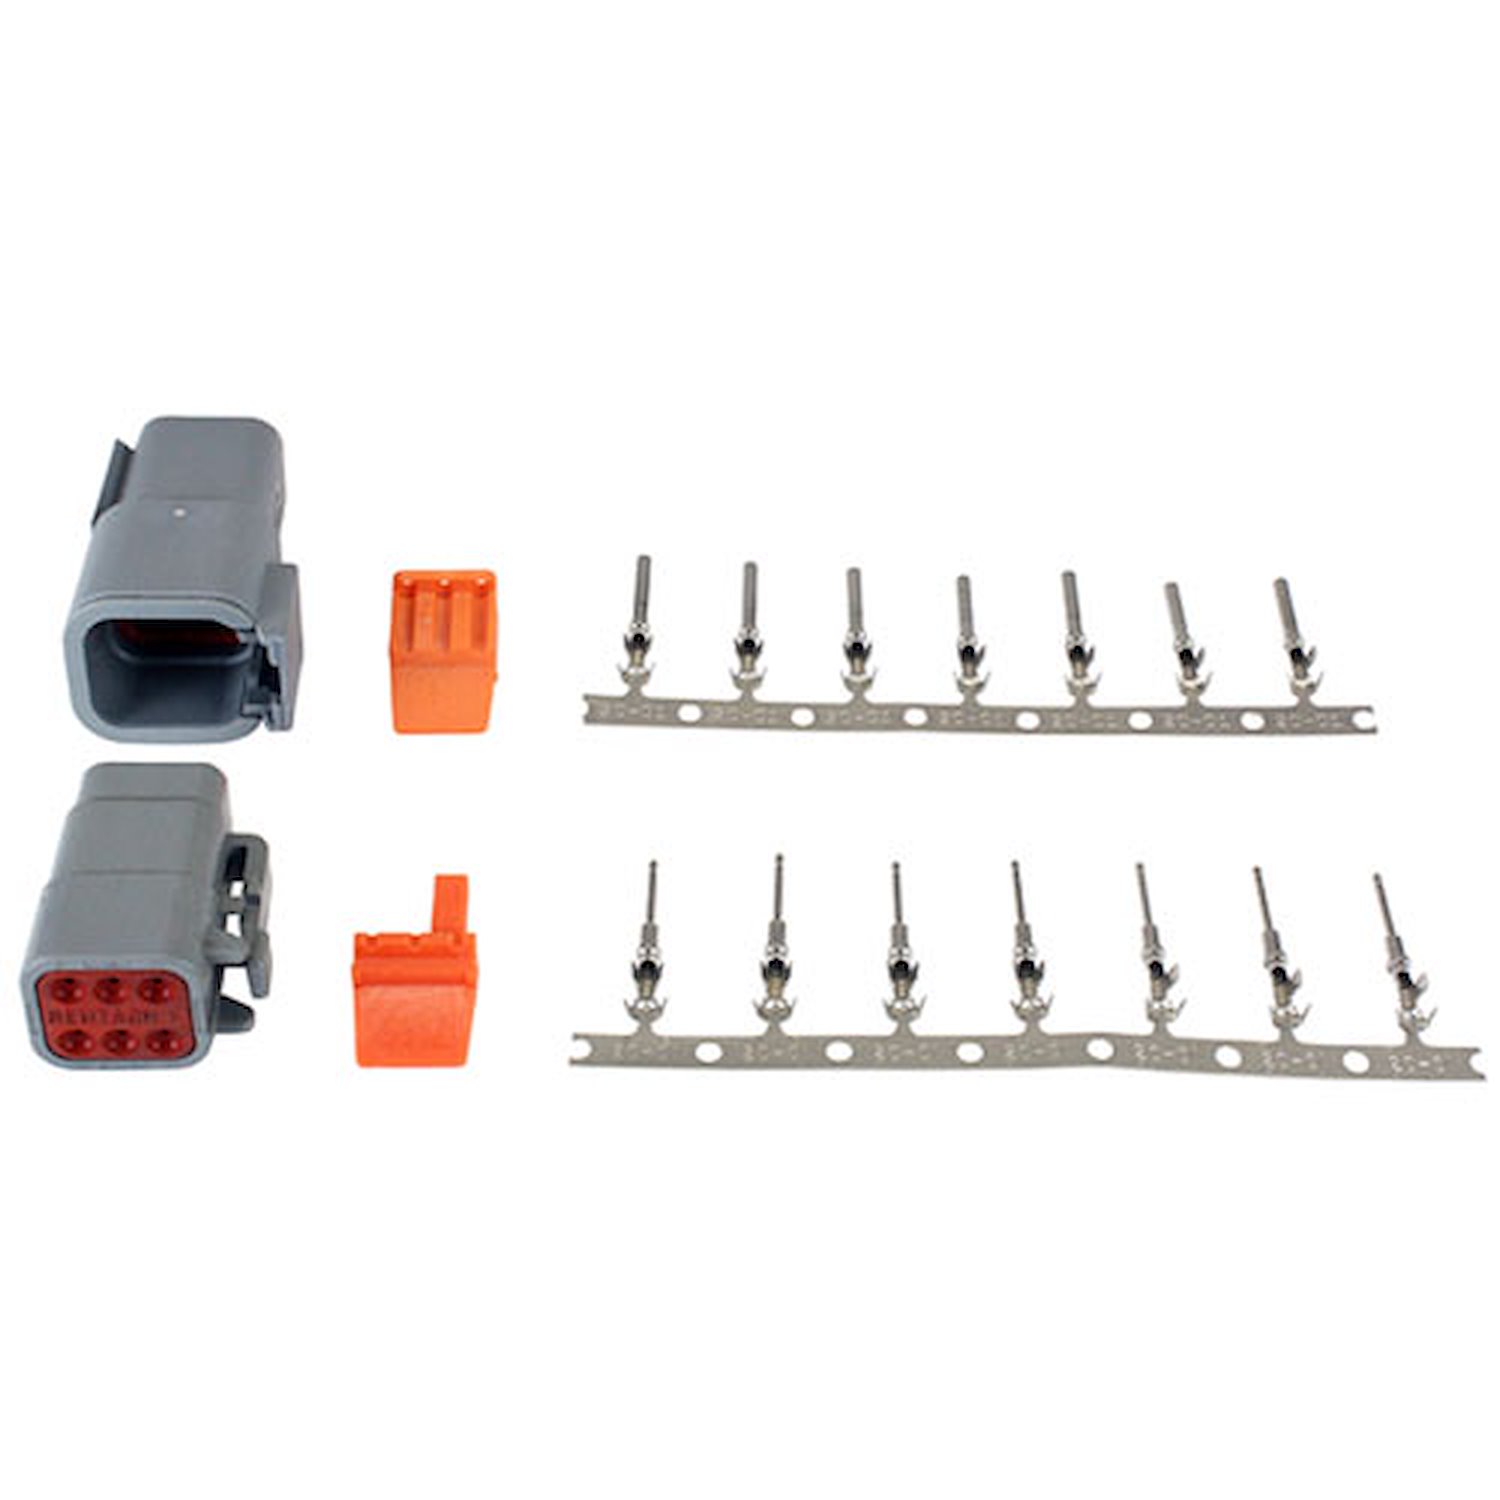 DTM-Style 6-Way Connector Kit Includes Plug, Receptacle, Plug